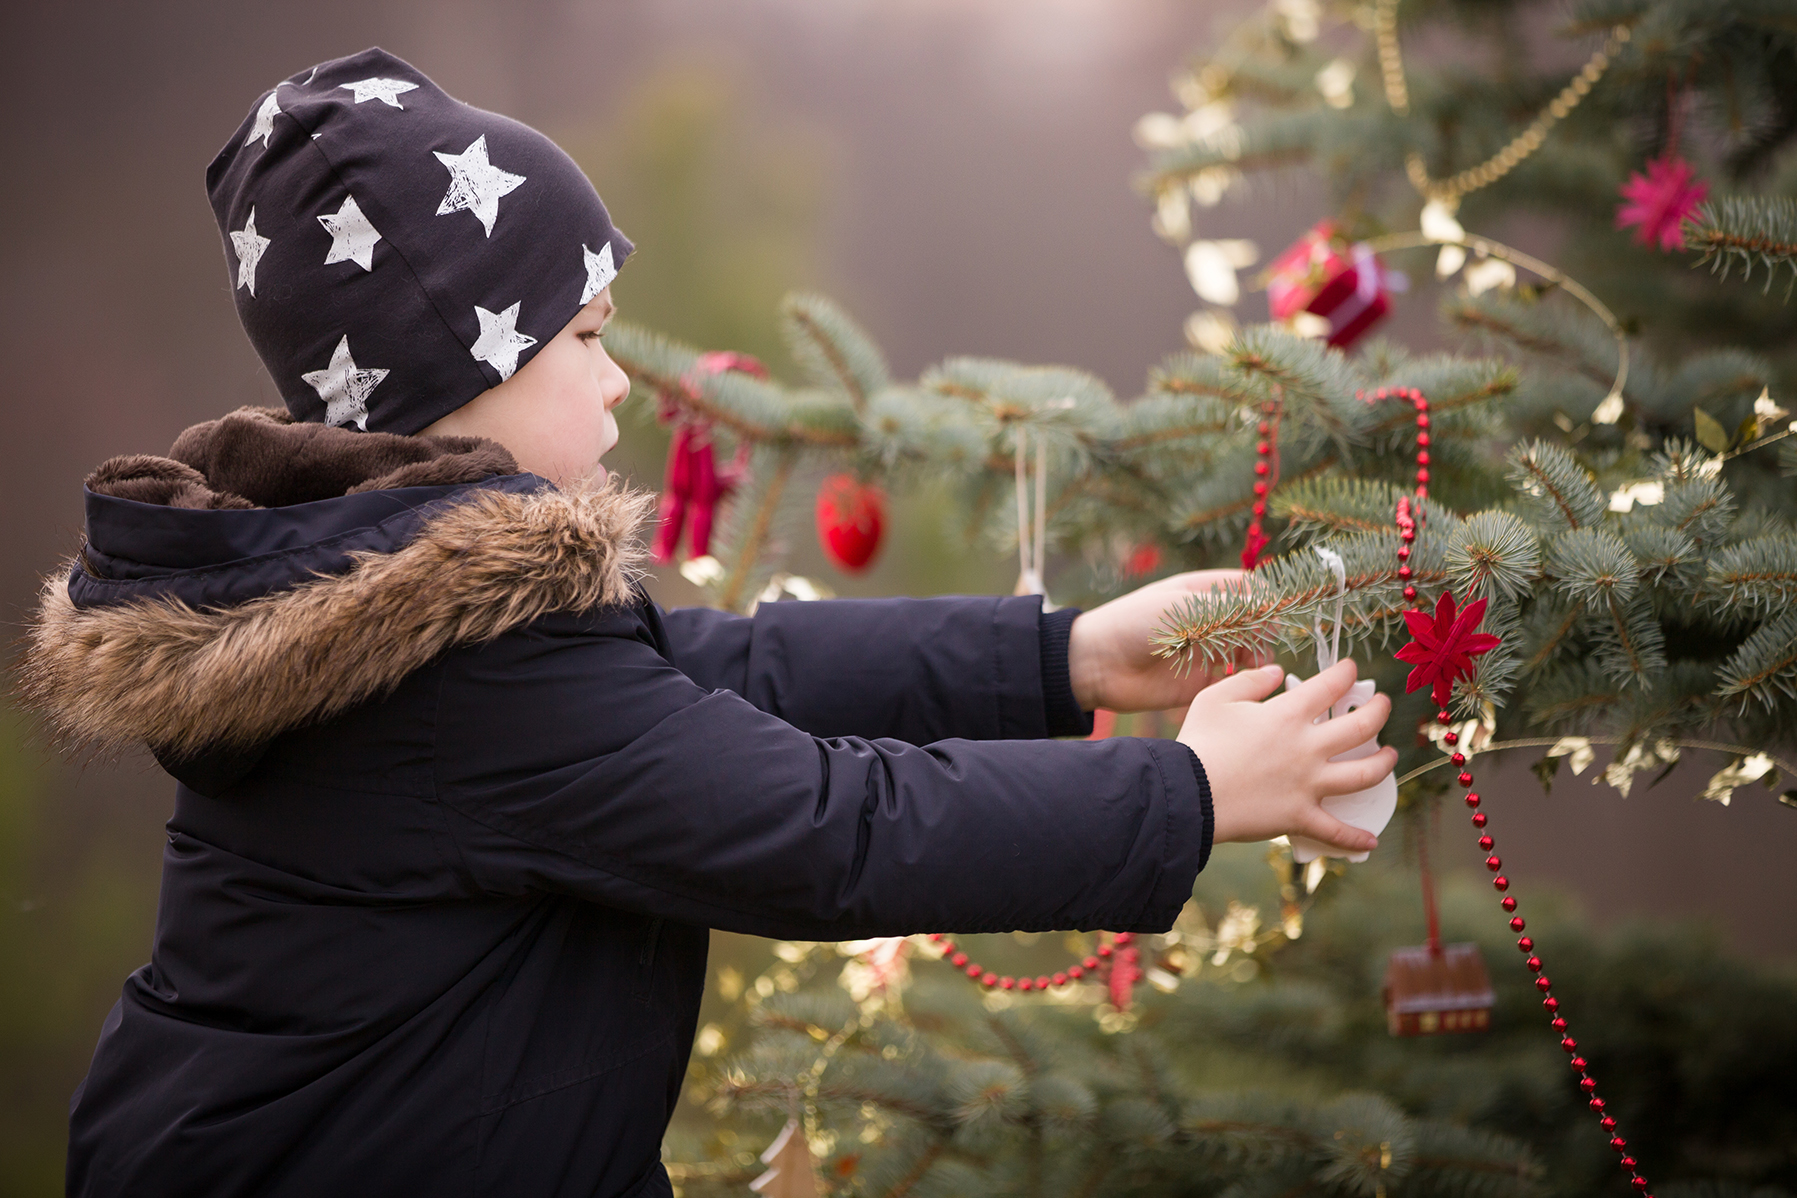 Portrait of cute kid boy in winter clothes decorating big Christmas tree outdoors. Child preparing for Christmas celebration.